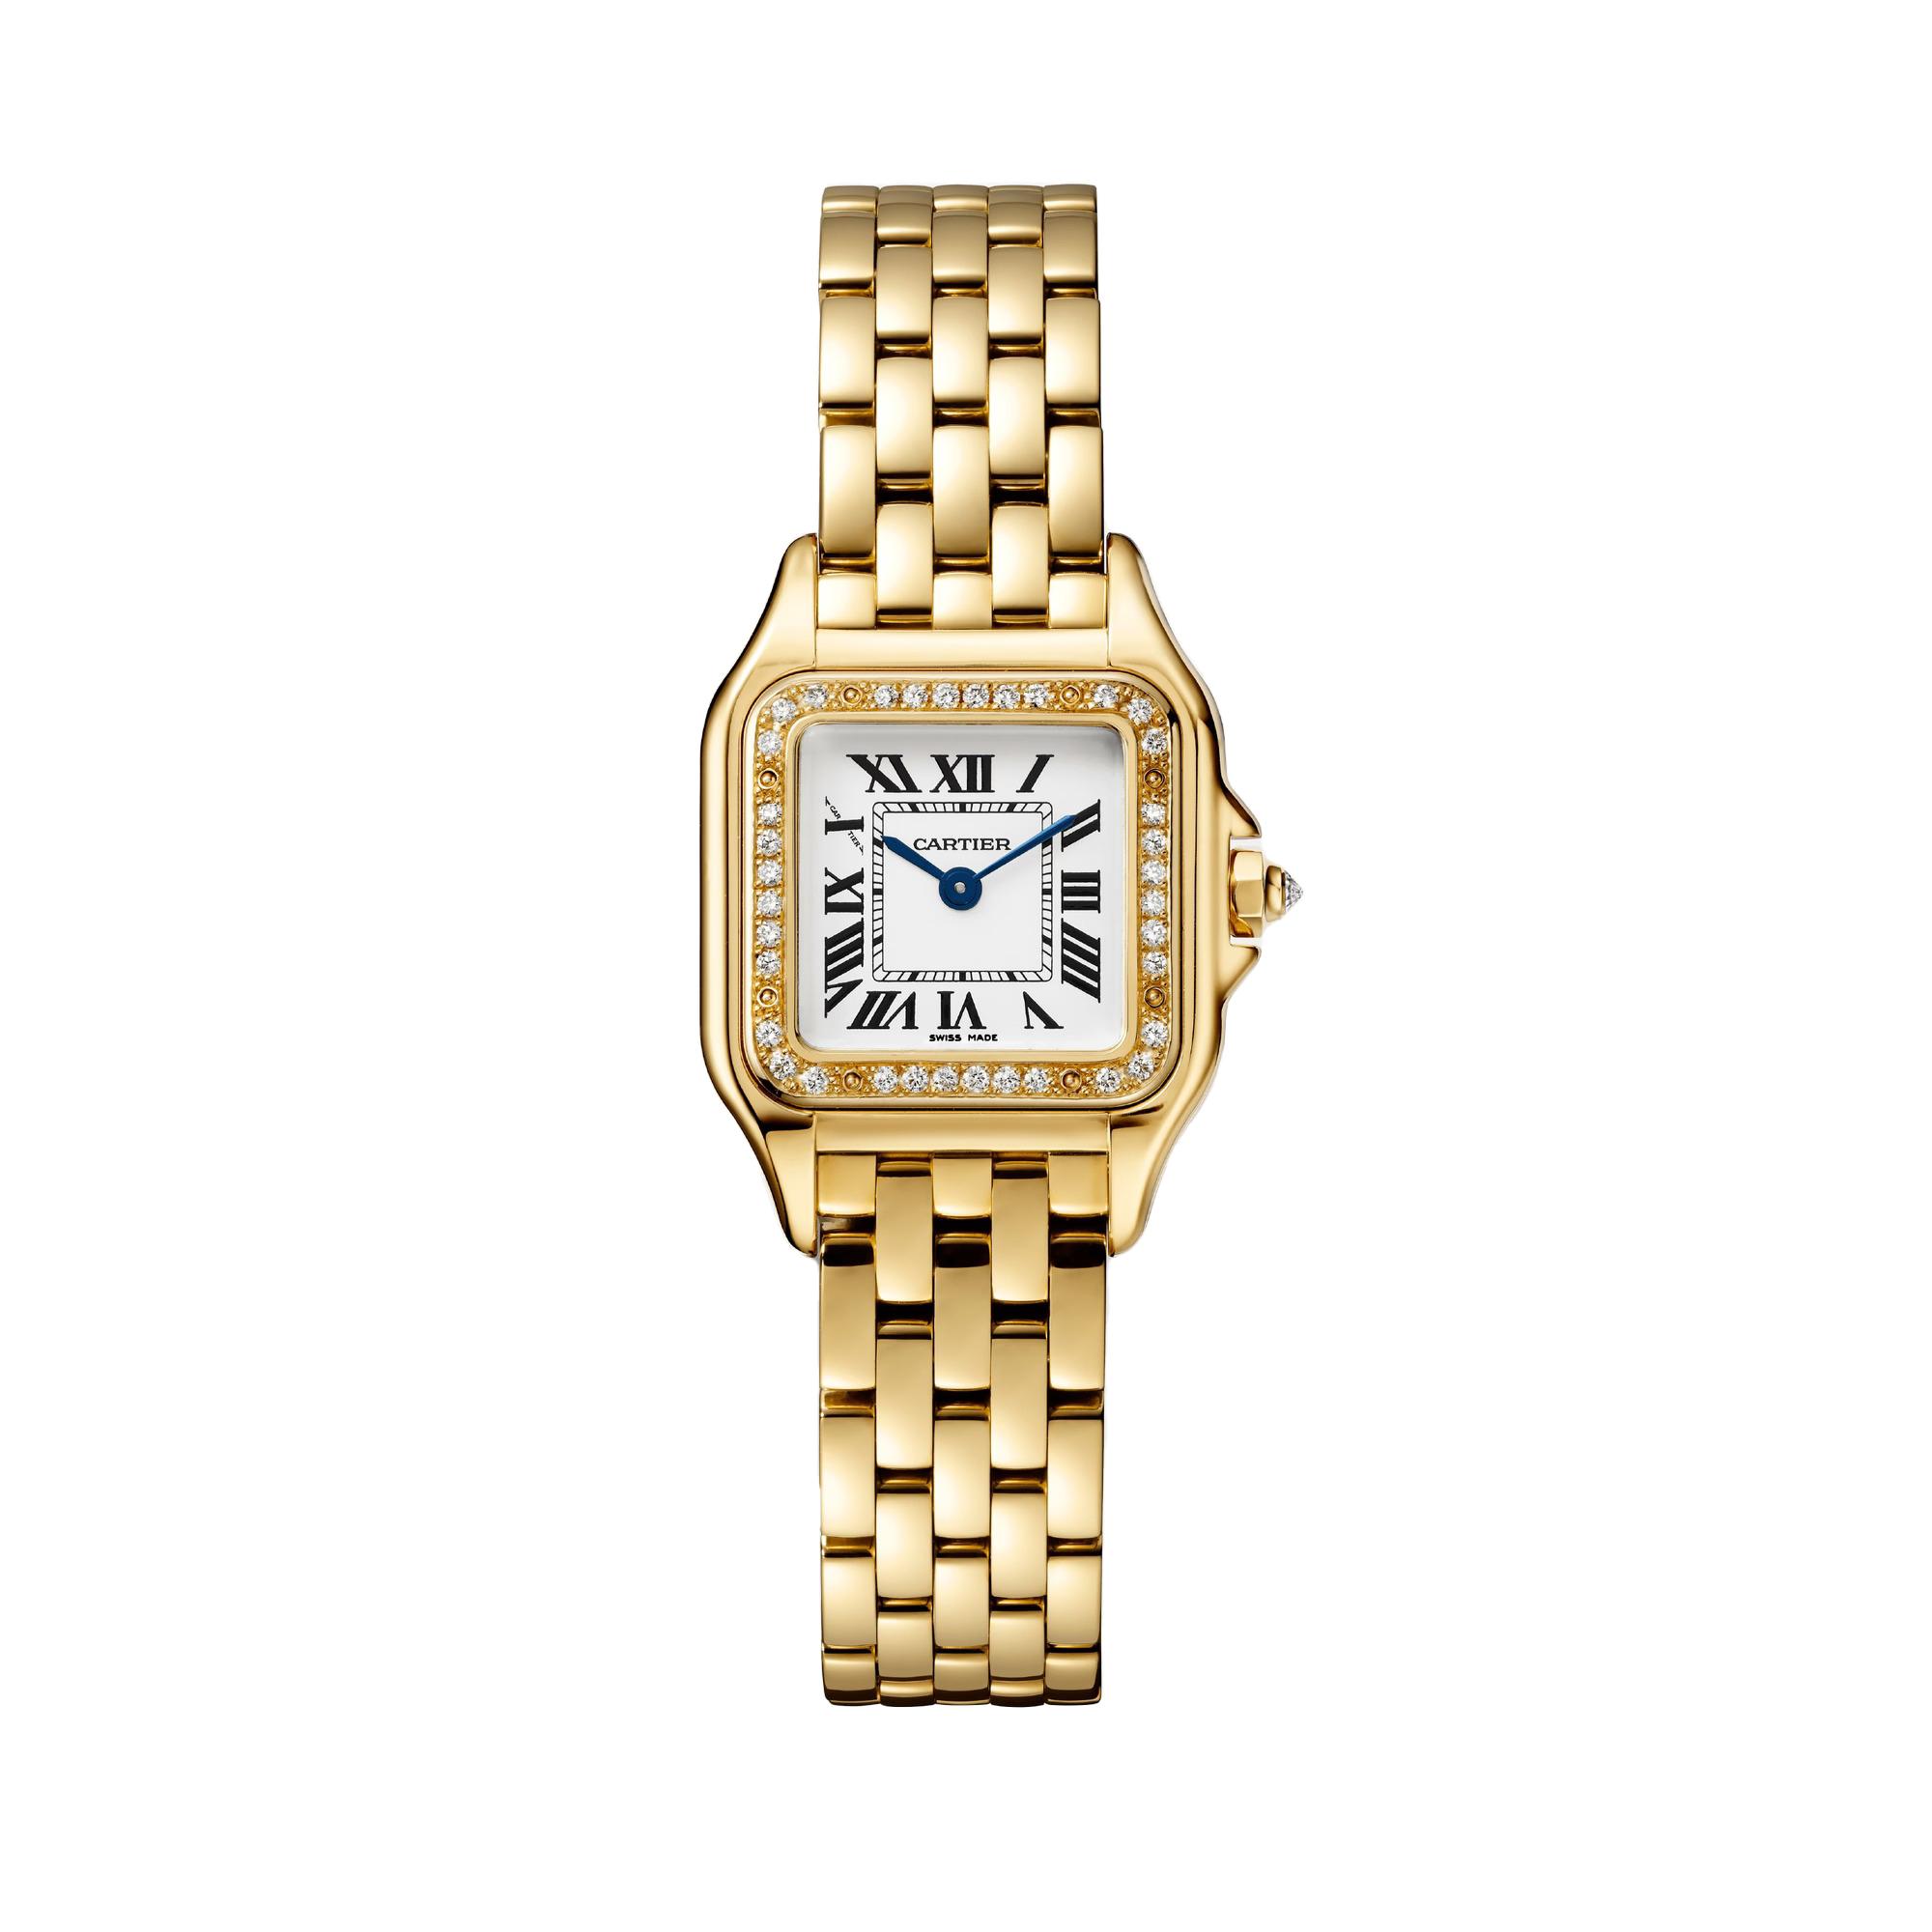 Panthere de Cartier Watch in Yellow Gold, size small